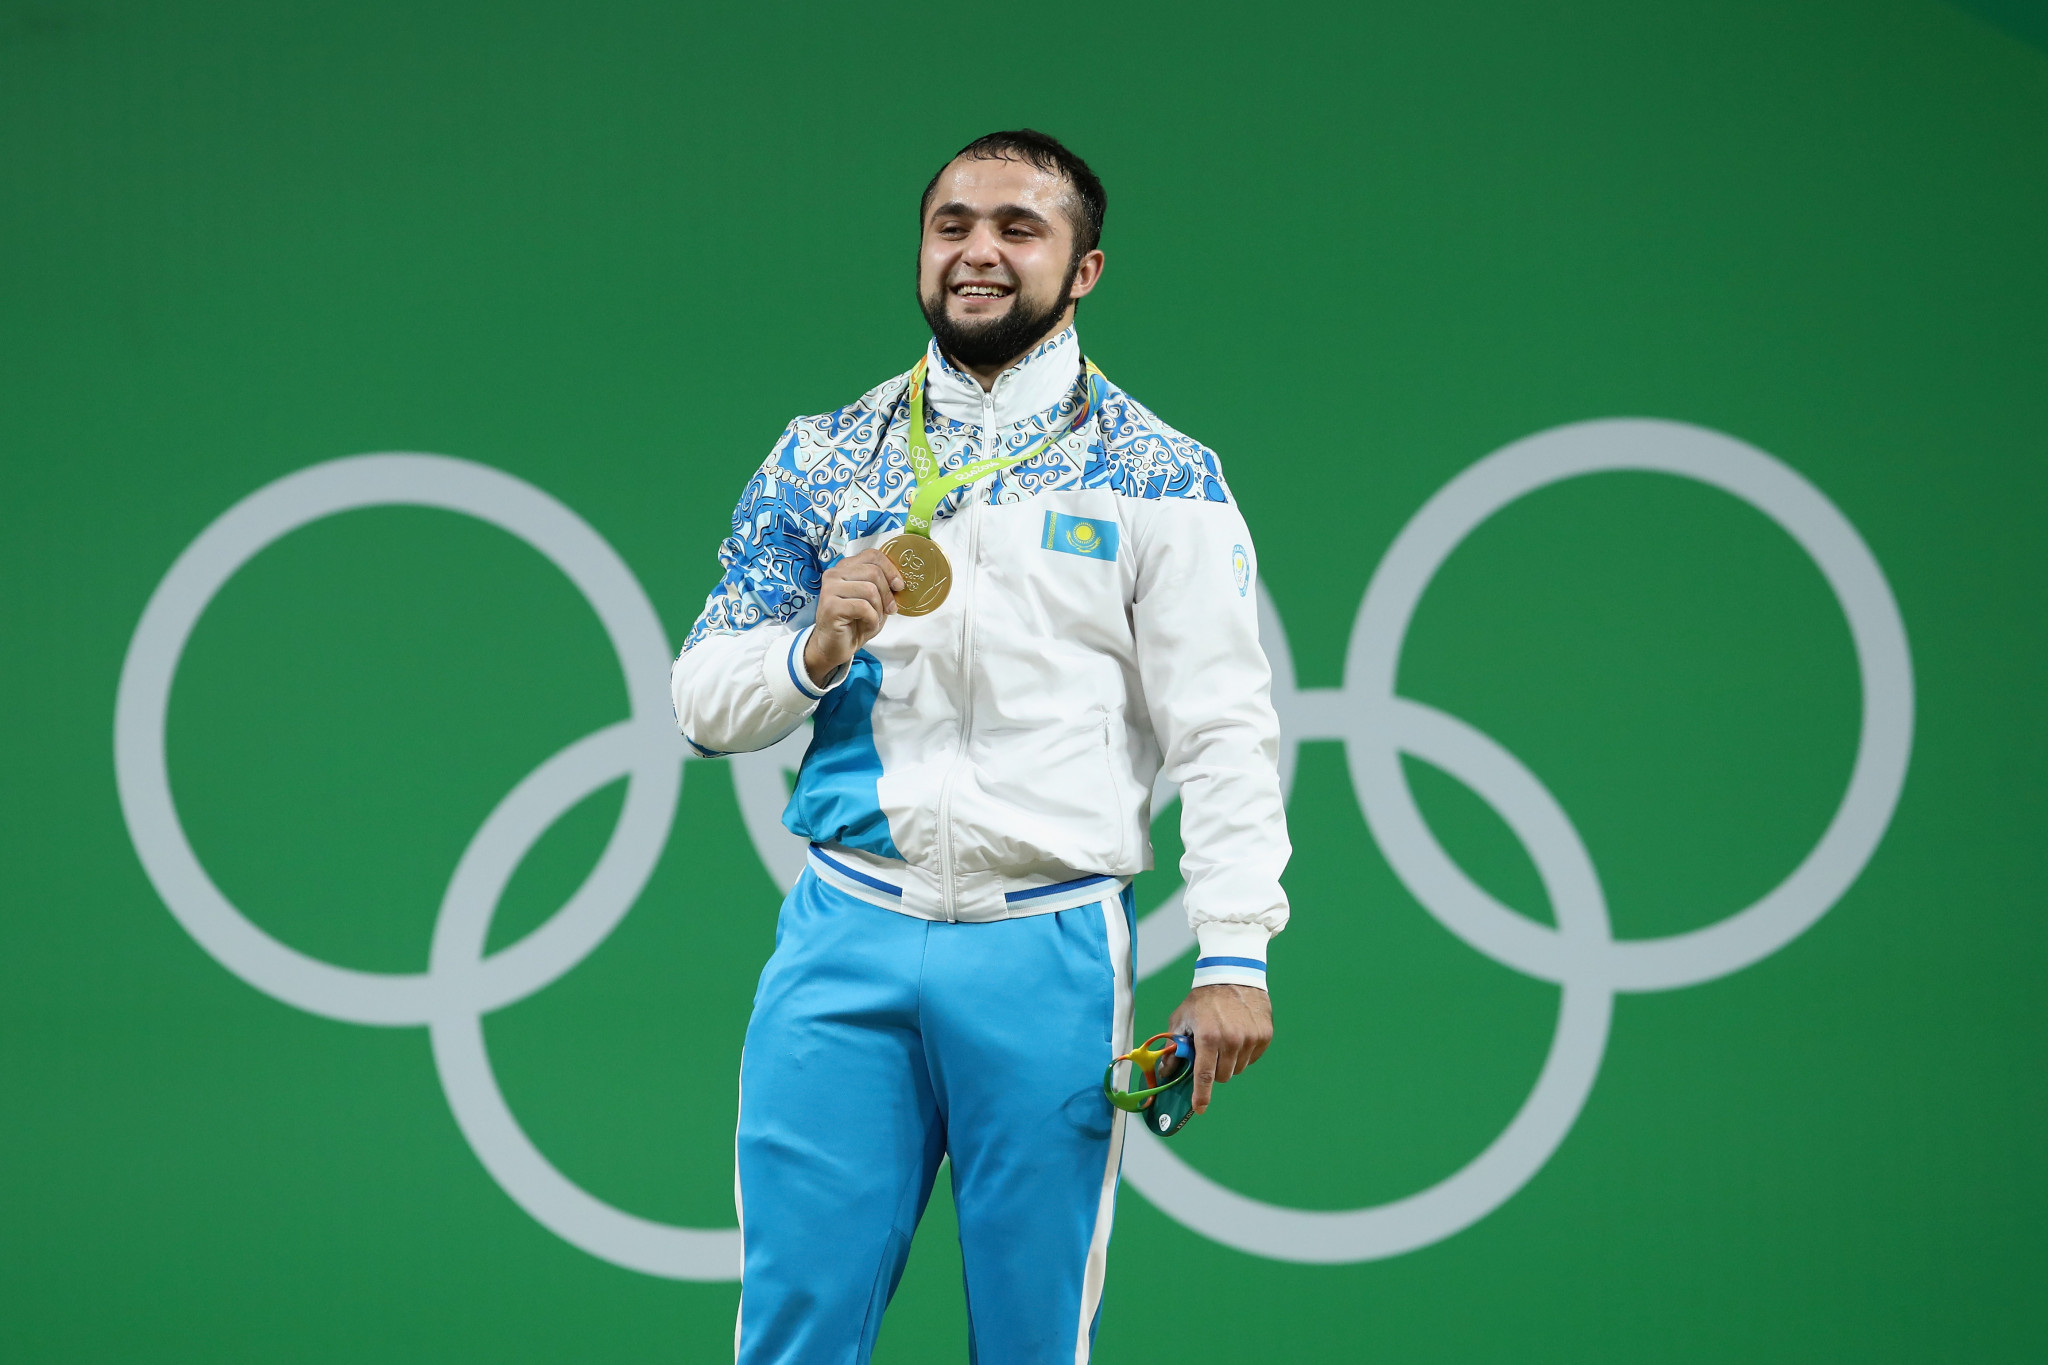 Nijat Rahimov broke a world record by four kilograms to claim gold at Rio 2016, but lost his gold medal after he was found to have cheated ©Getty Images